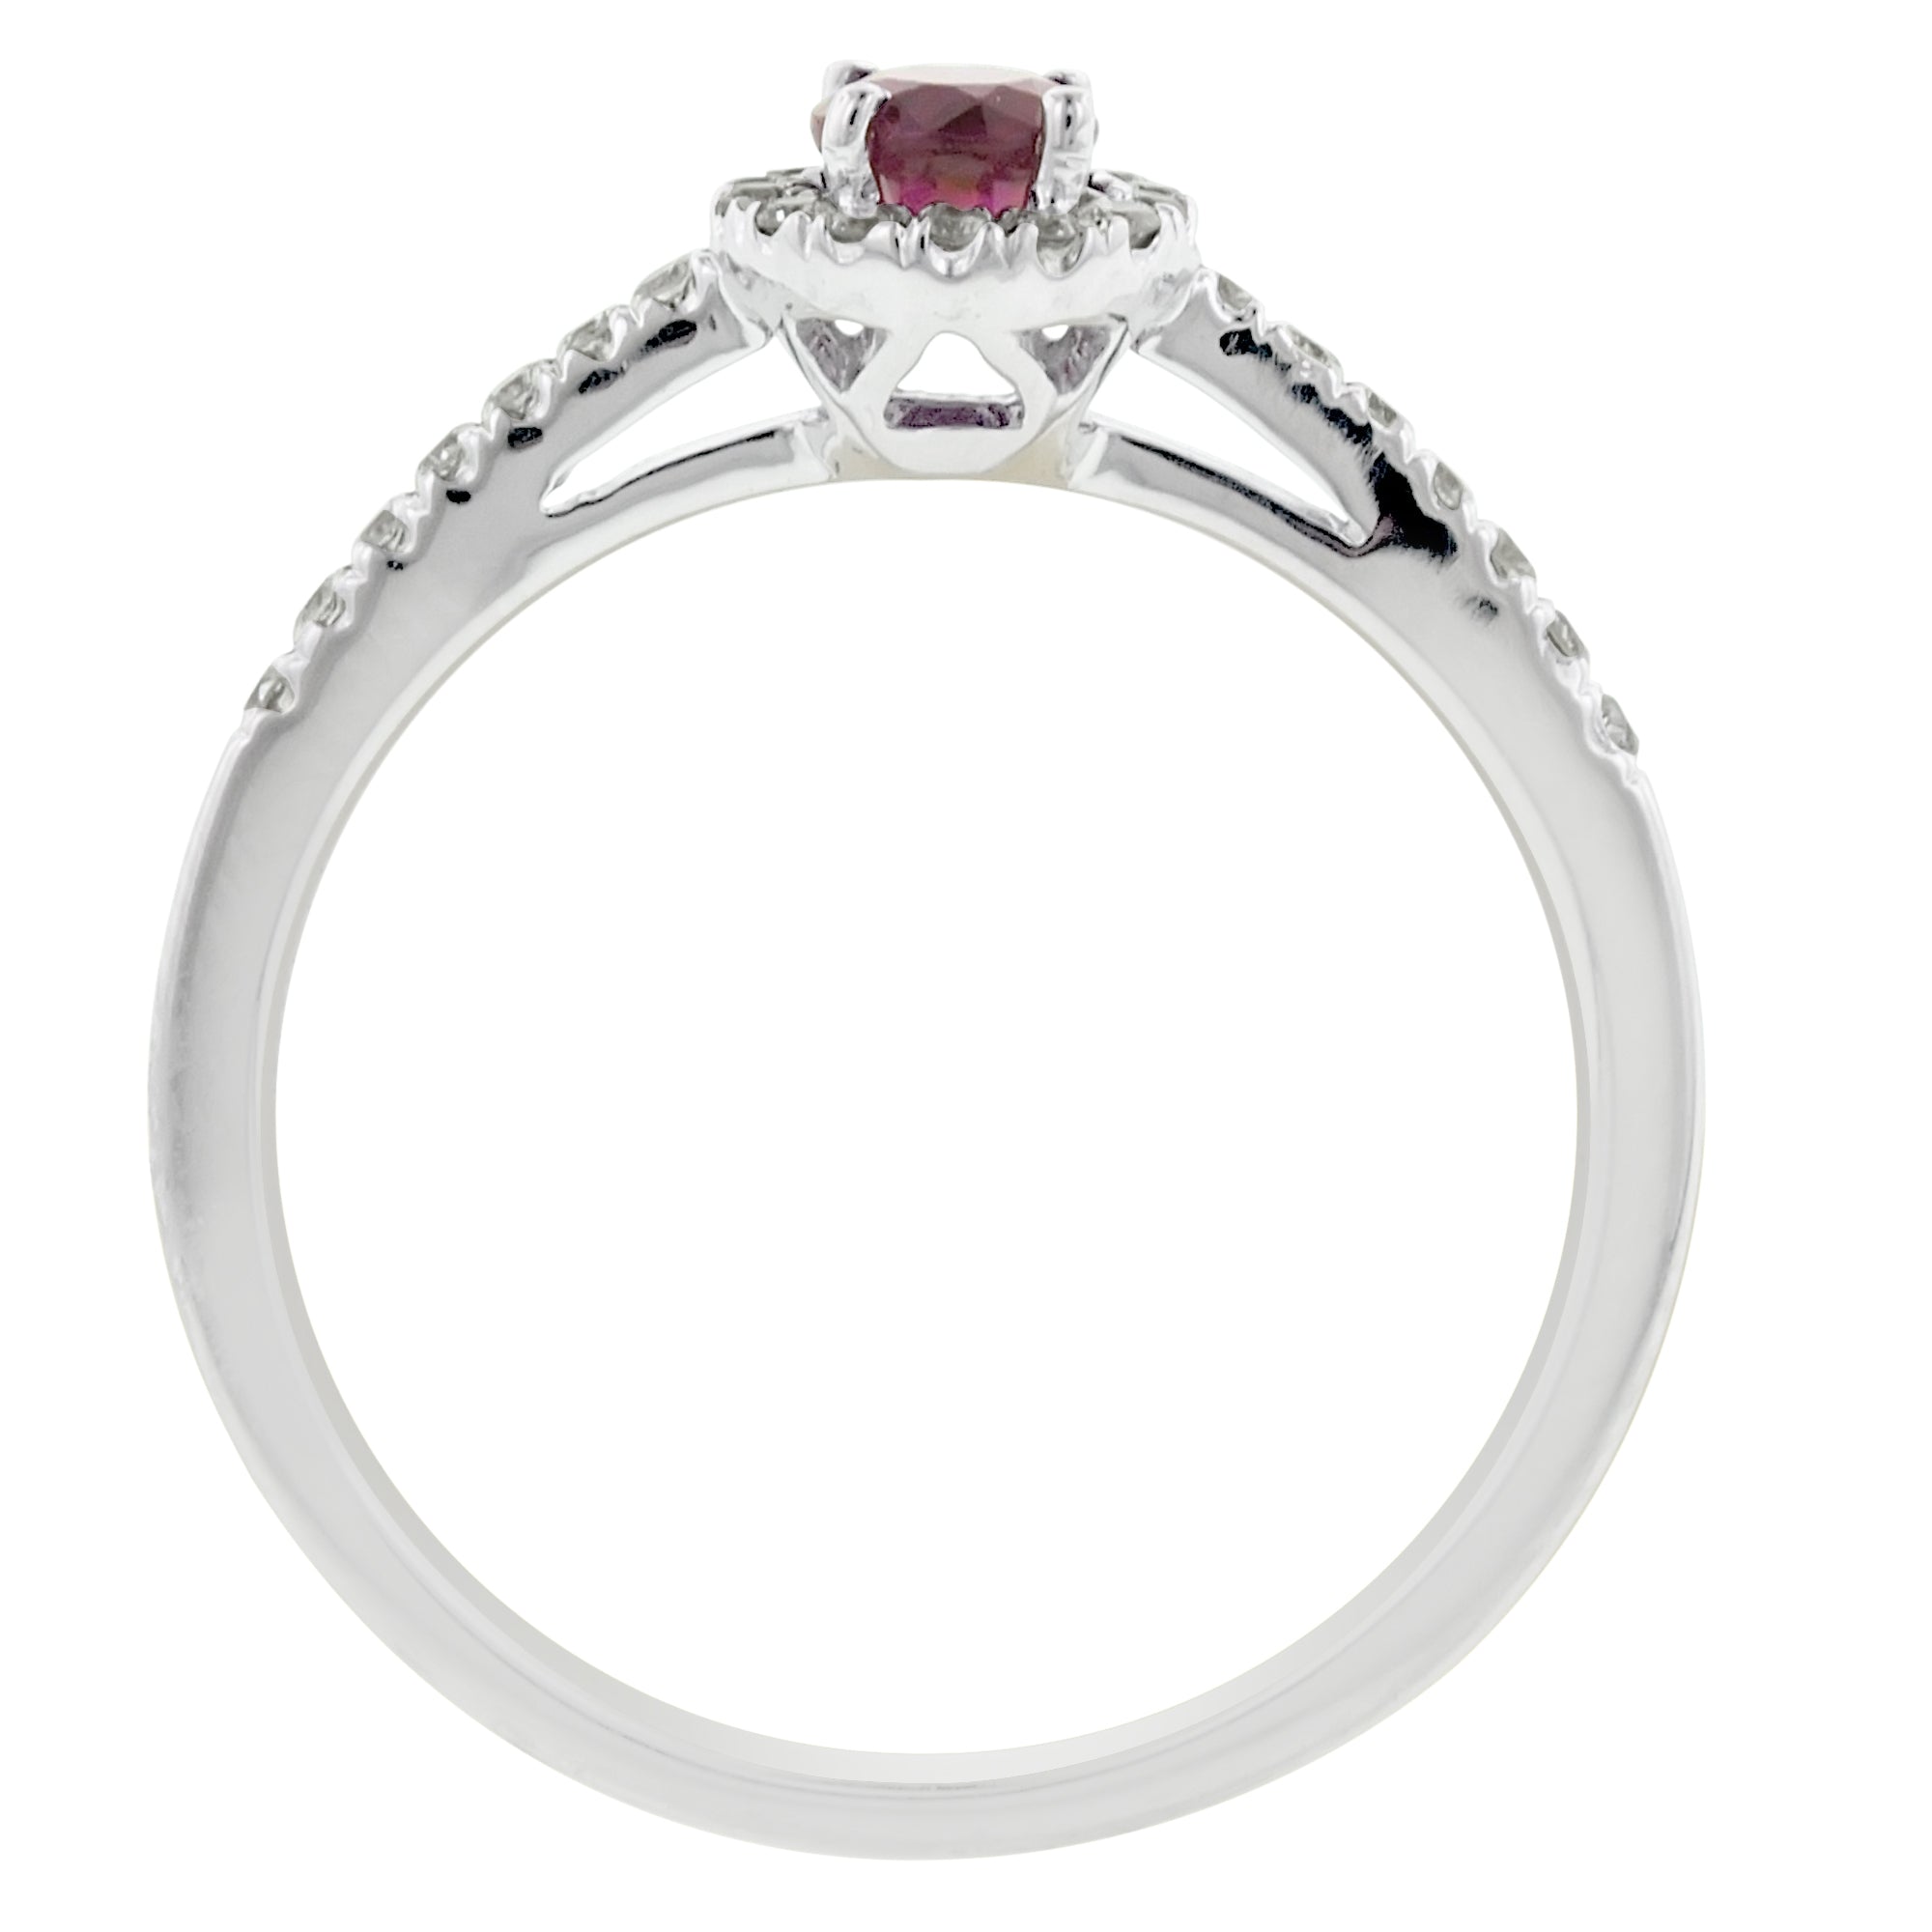 Ruby Halo Ring in 14kt White Gold with Diamonds (1/7ct tw)